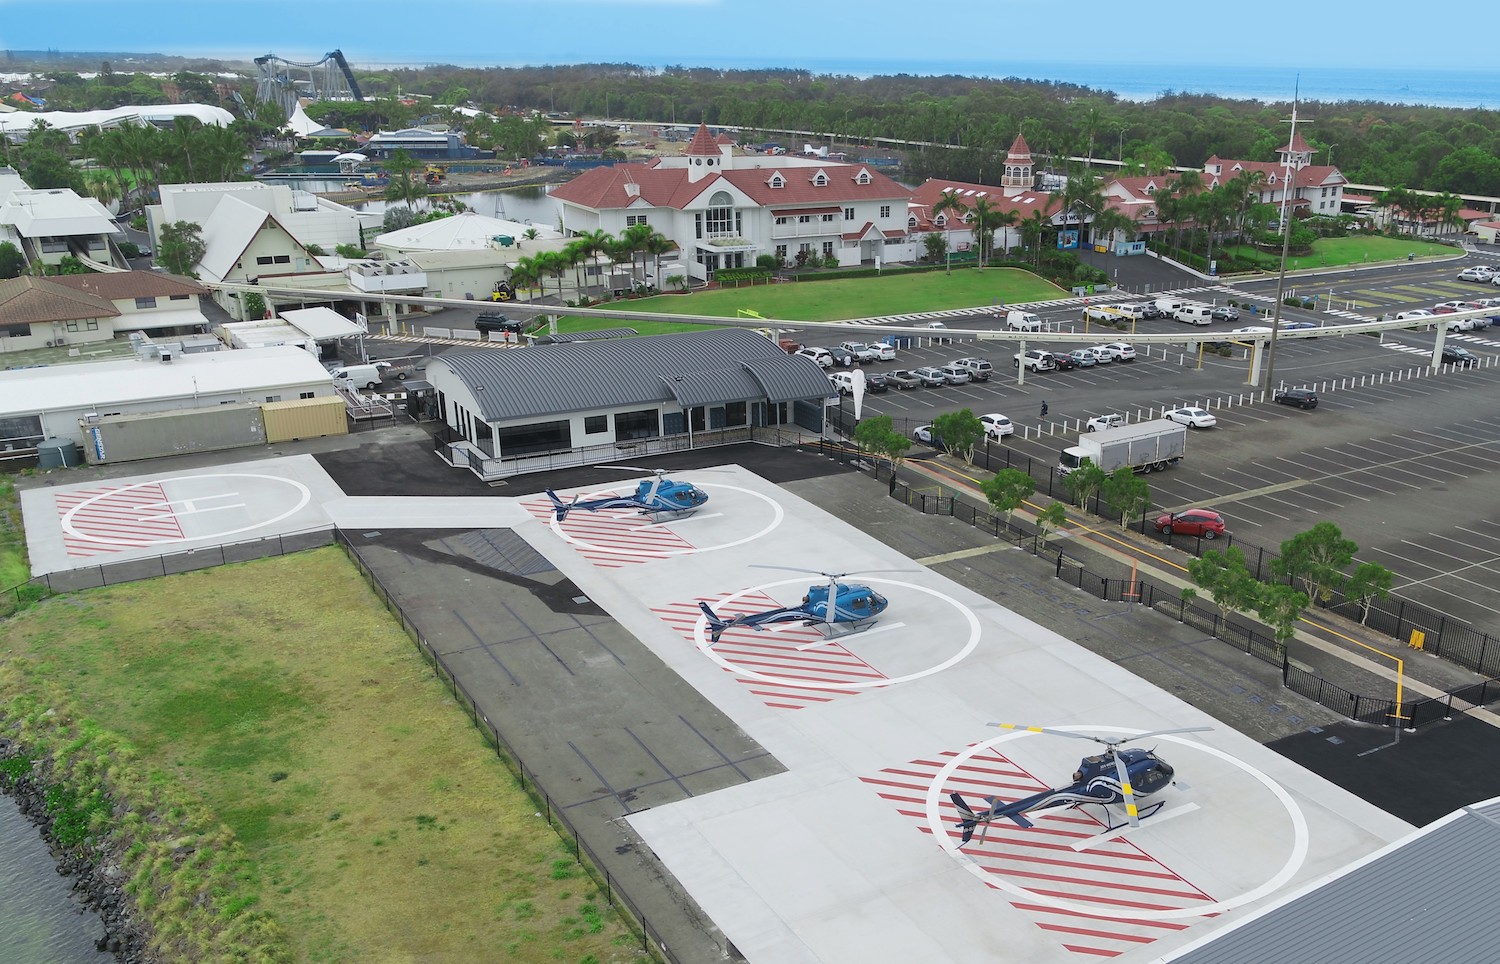 Sea world helicopters new terminal, Australia's largest privately owned heliport